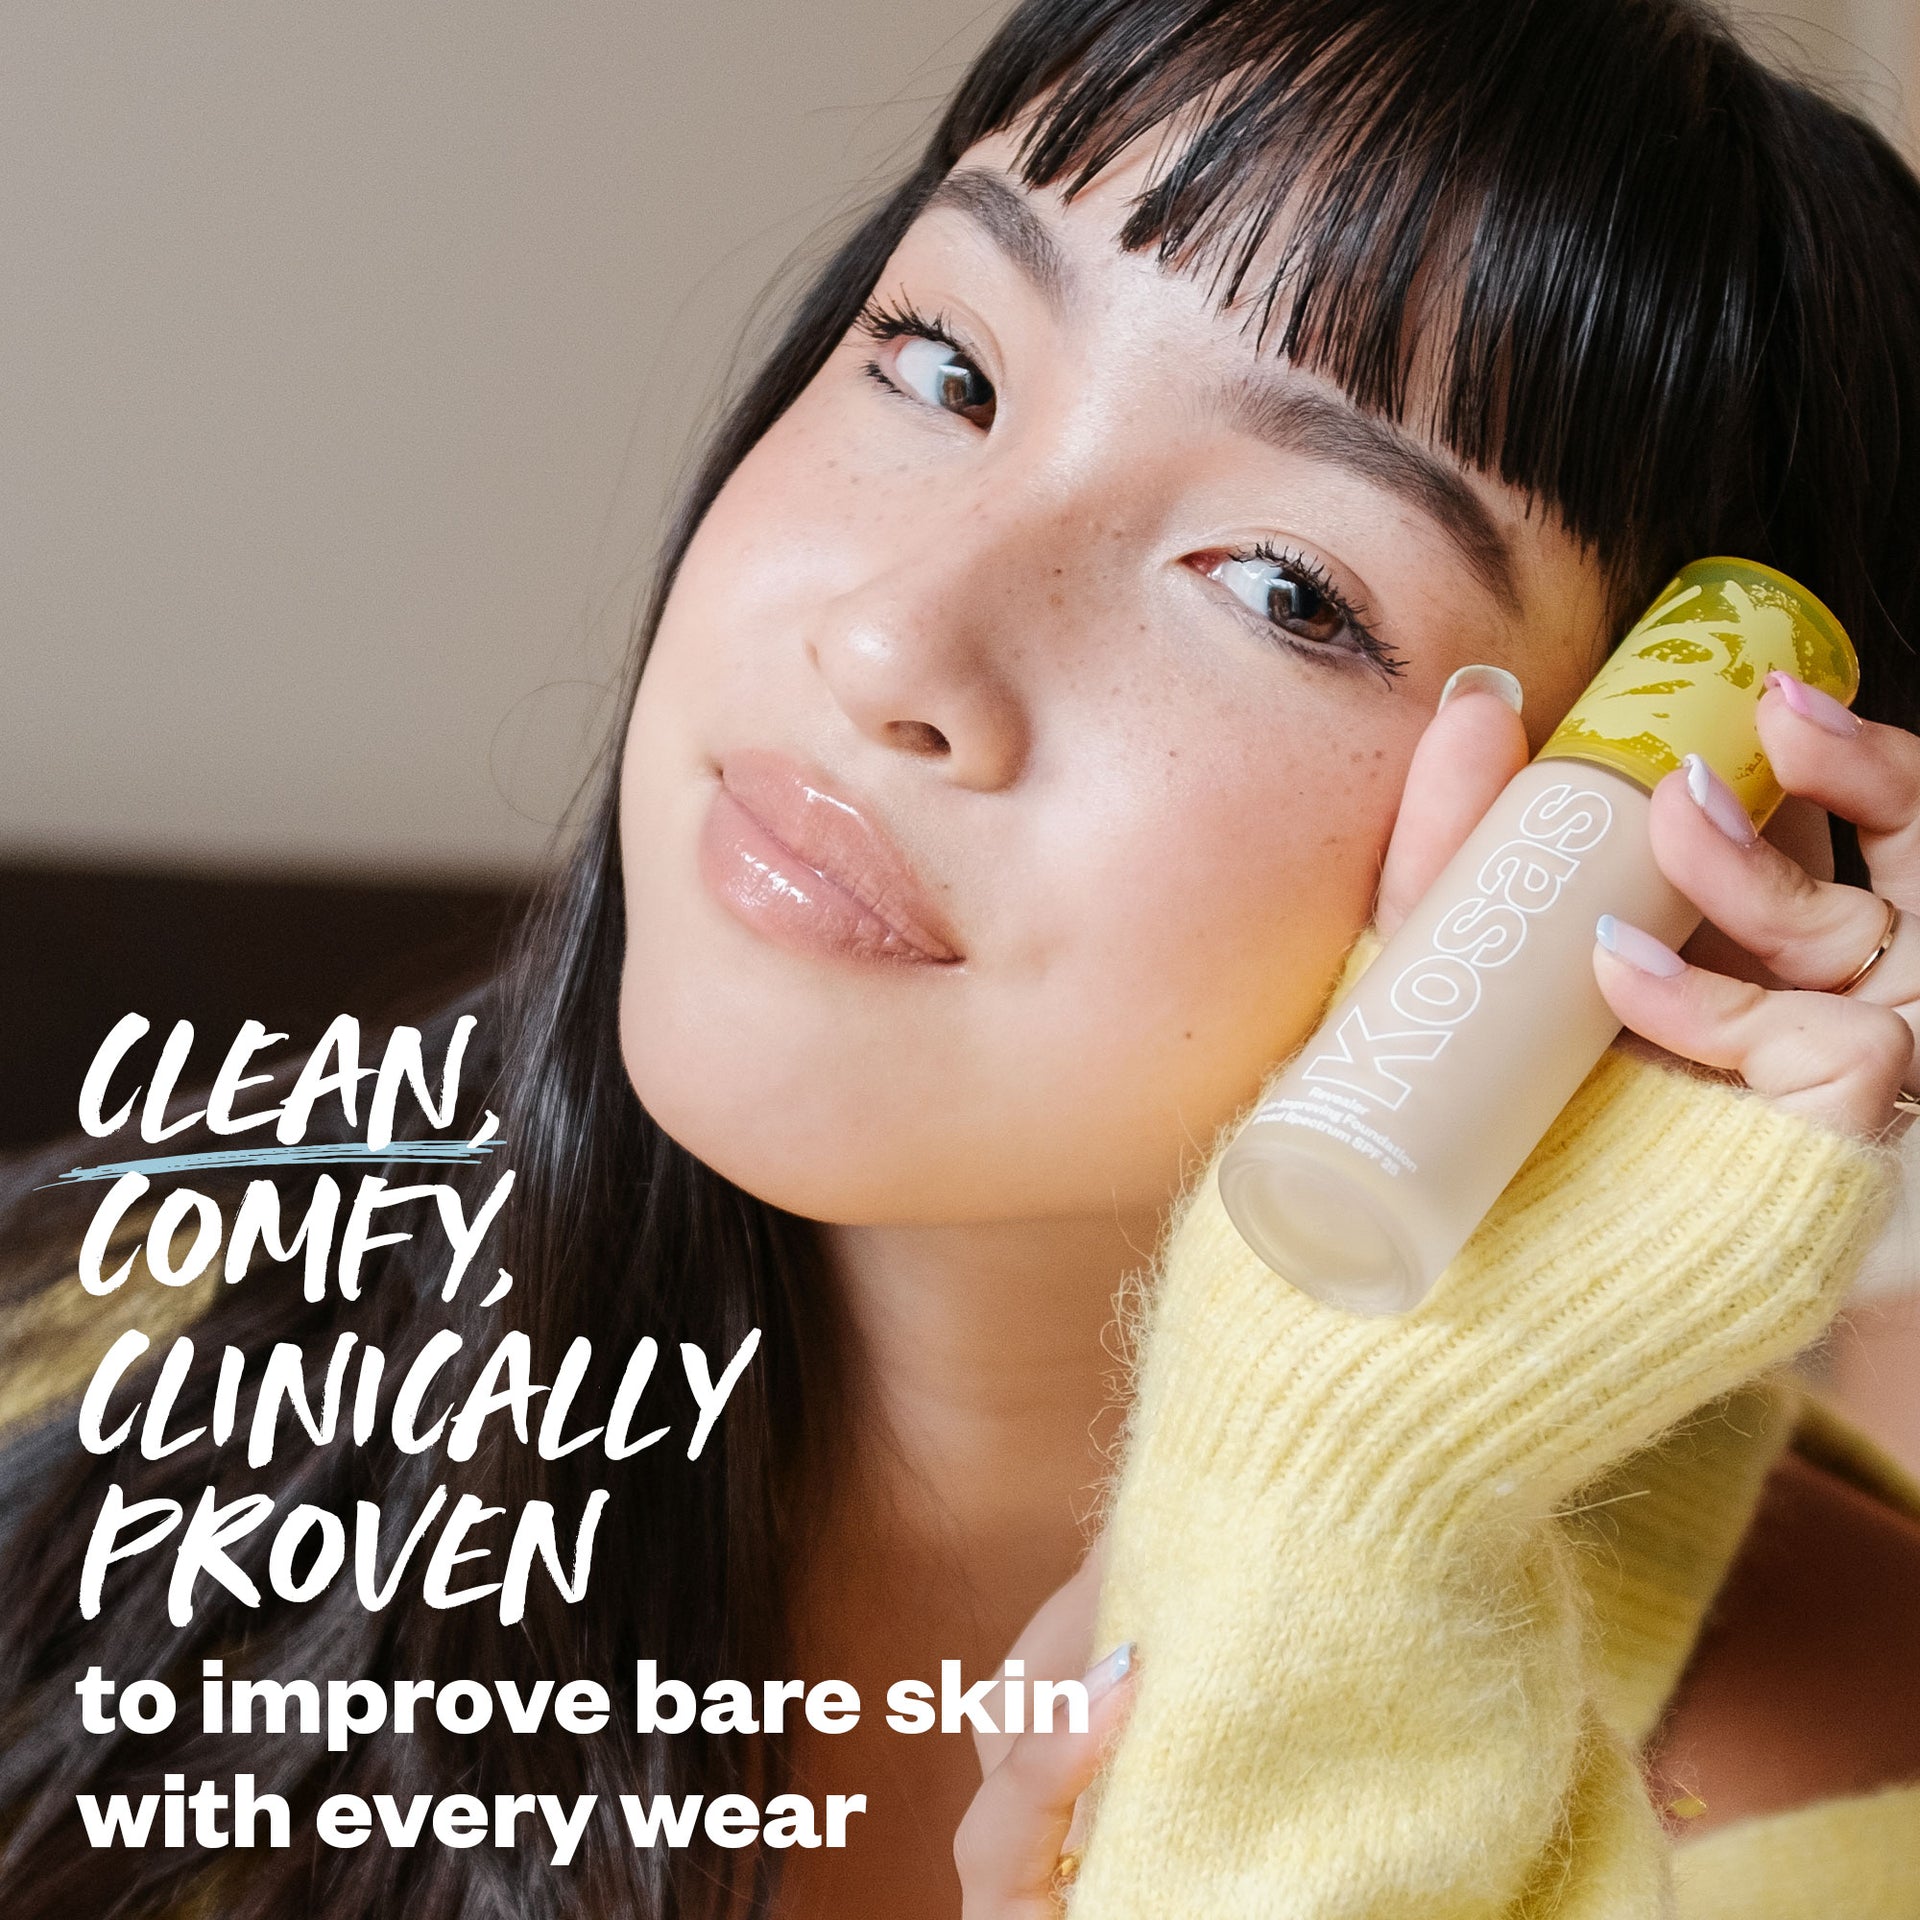 Clean, Comfy & Clinically Proven